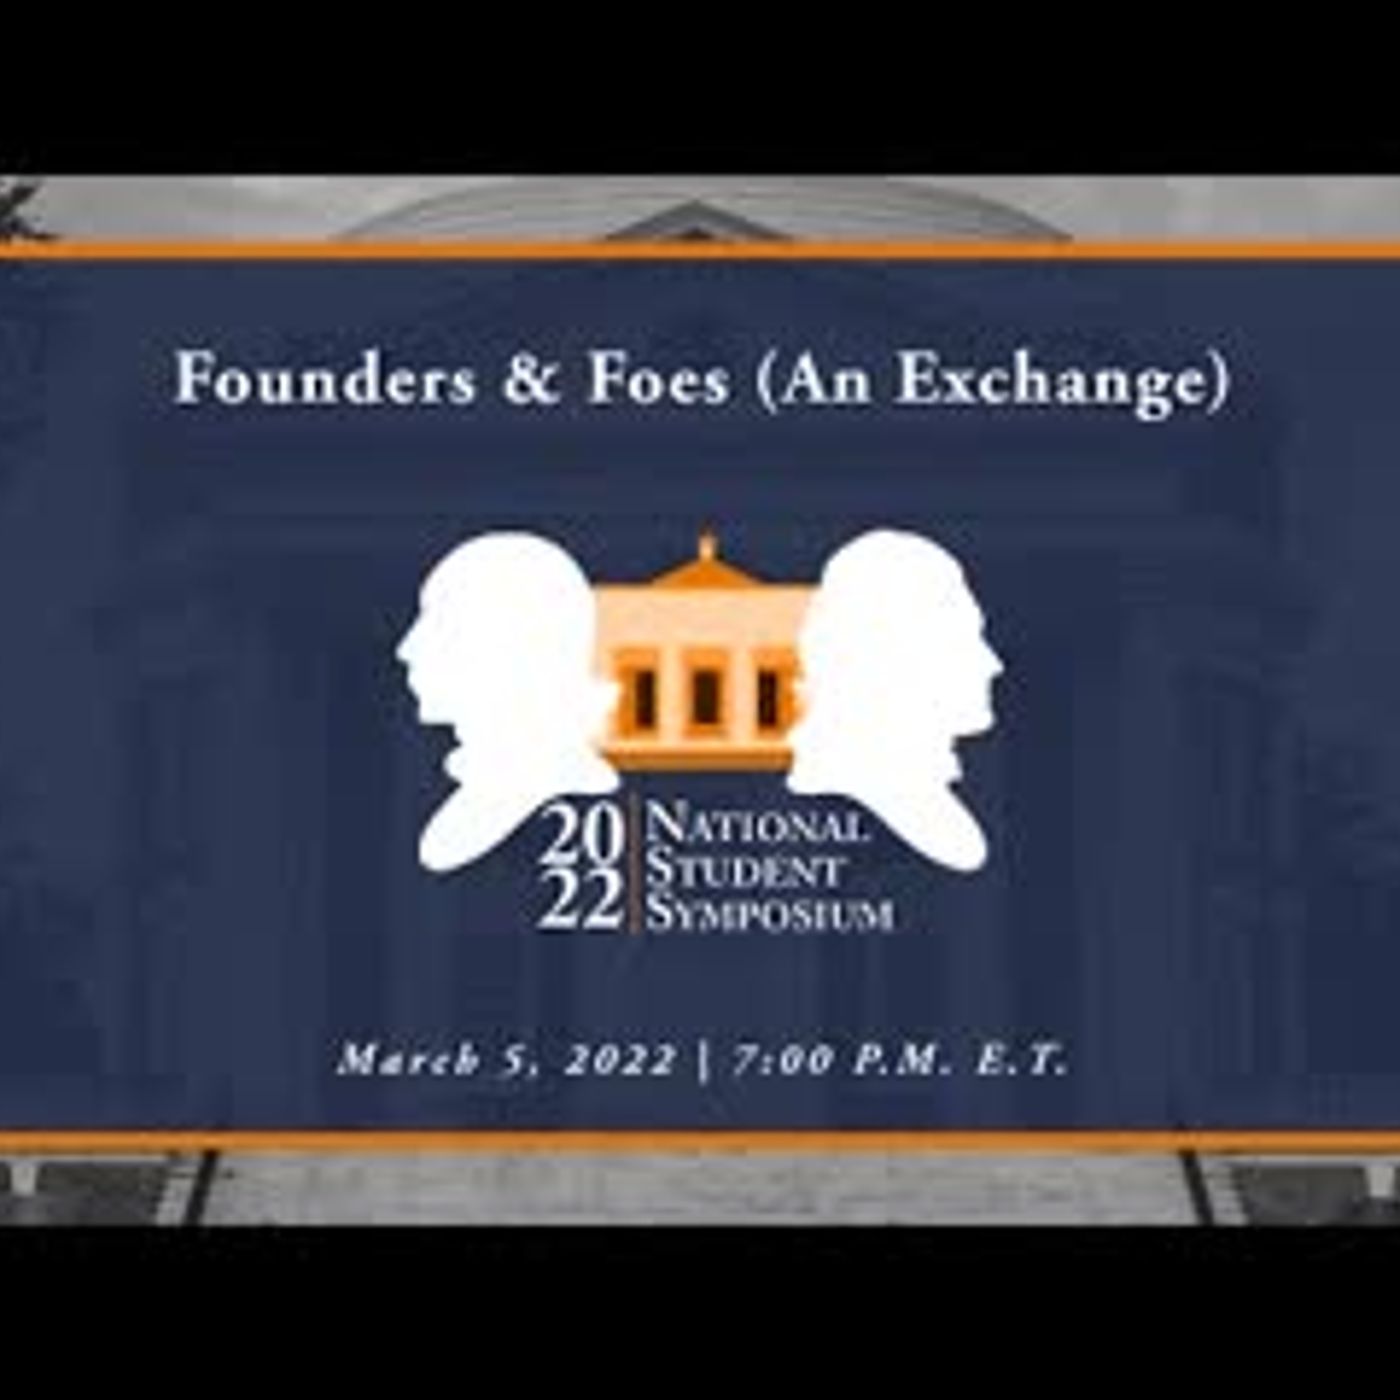 Banquet, Founders & Foes (An Exchange)